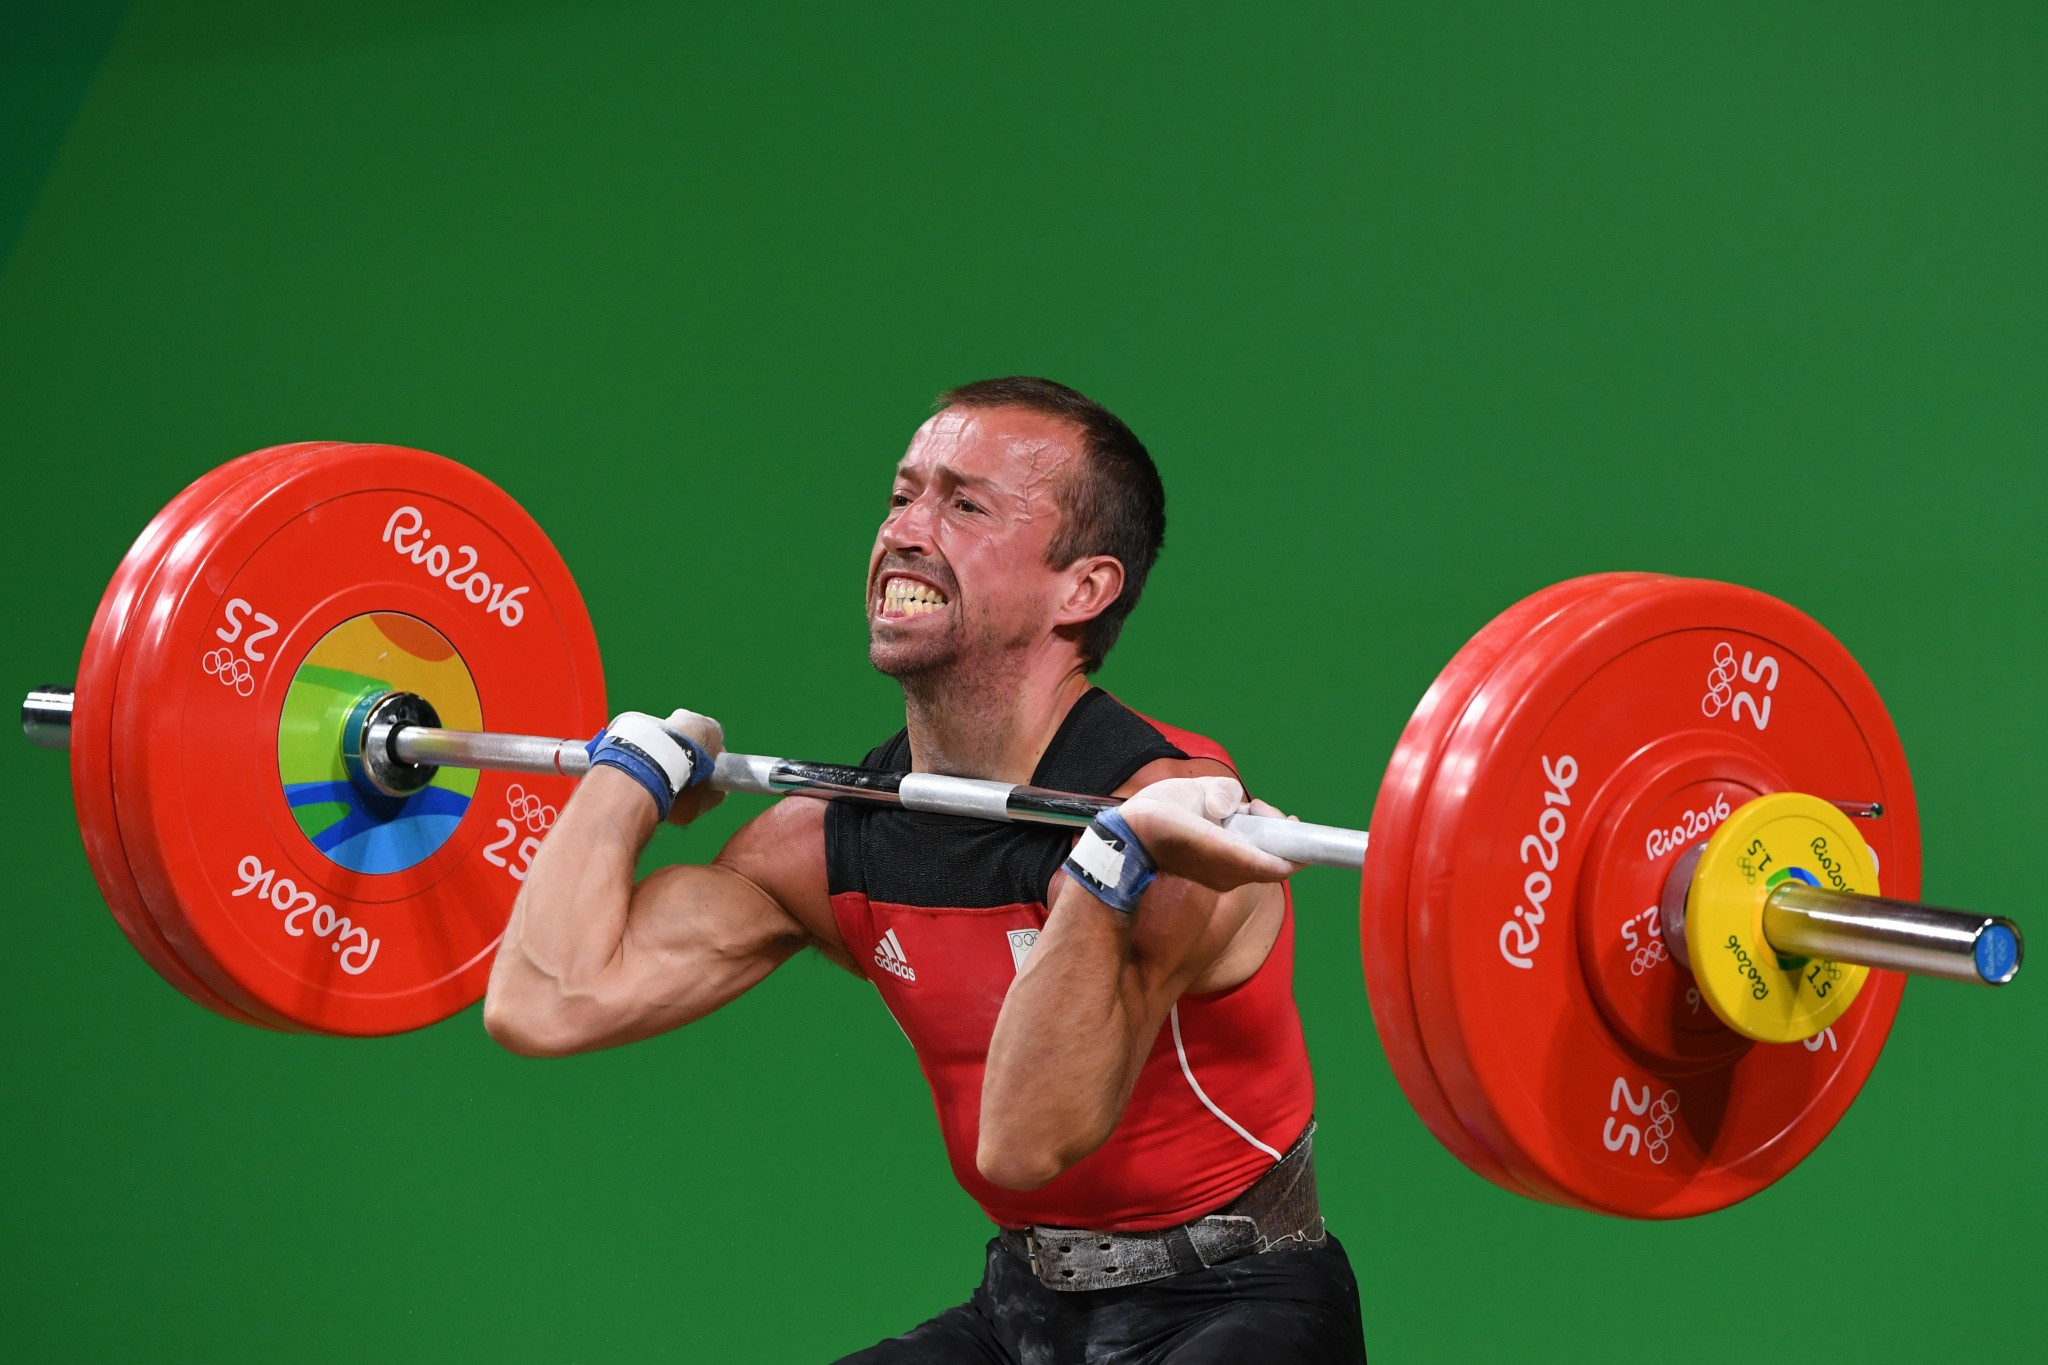 Tom Goegebuer, who competed at Rio 2016 and is now President of the Belgium Weightlifting Federation, is a member of the Clean Sport Commission announced by the IWF ©Getty Images